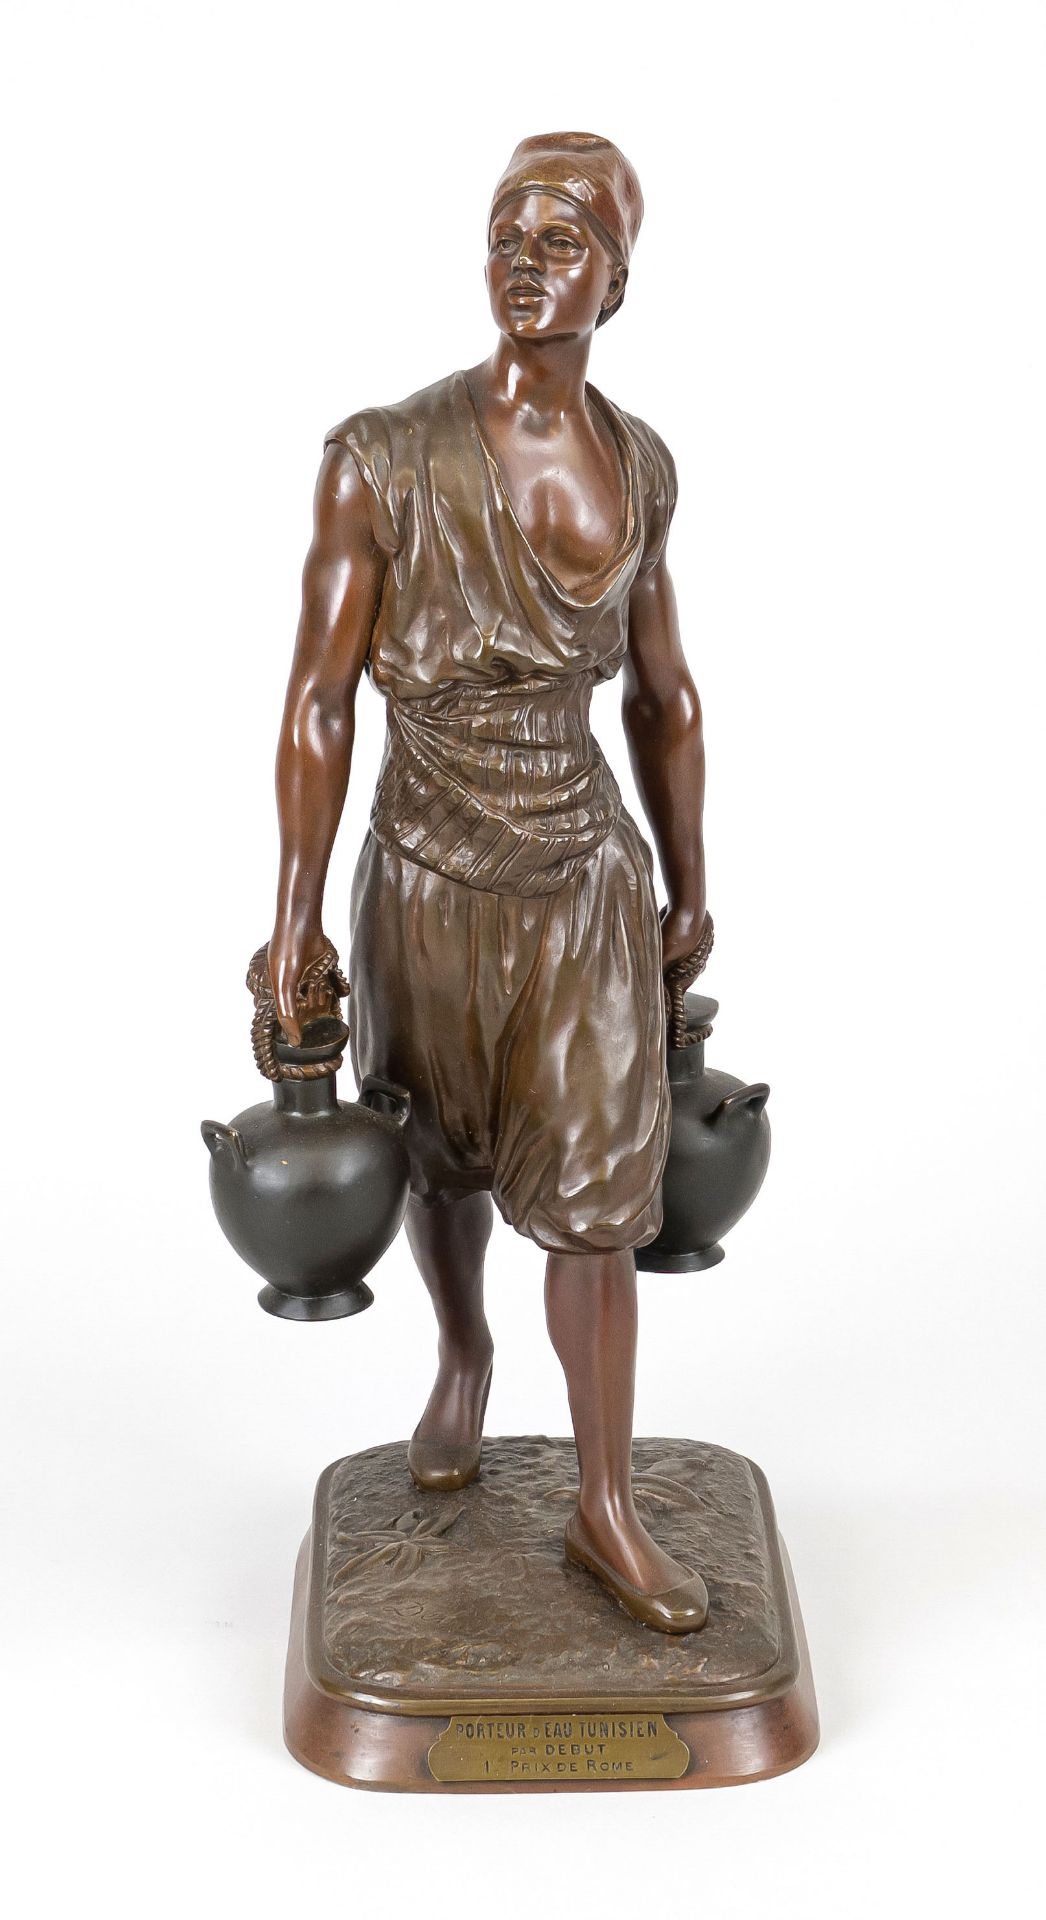 Marcel Début (1865-1933), French sculptor, large, representative bronze, patinated in various